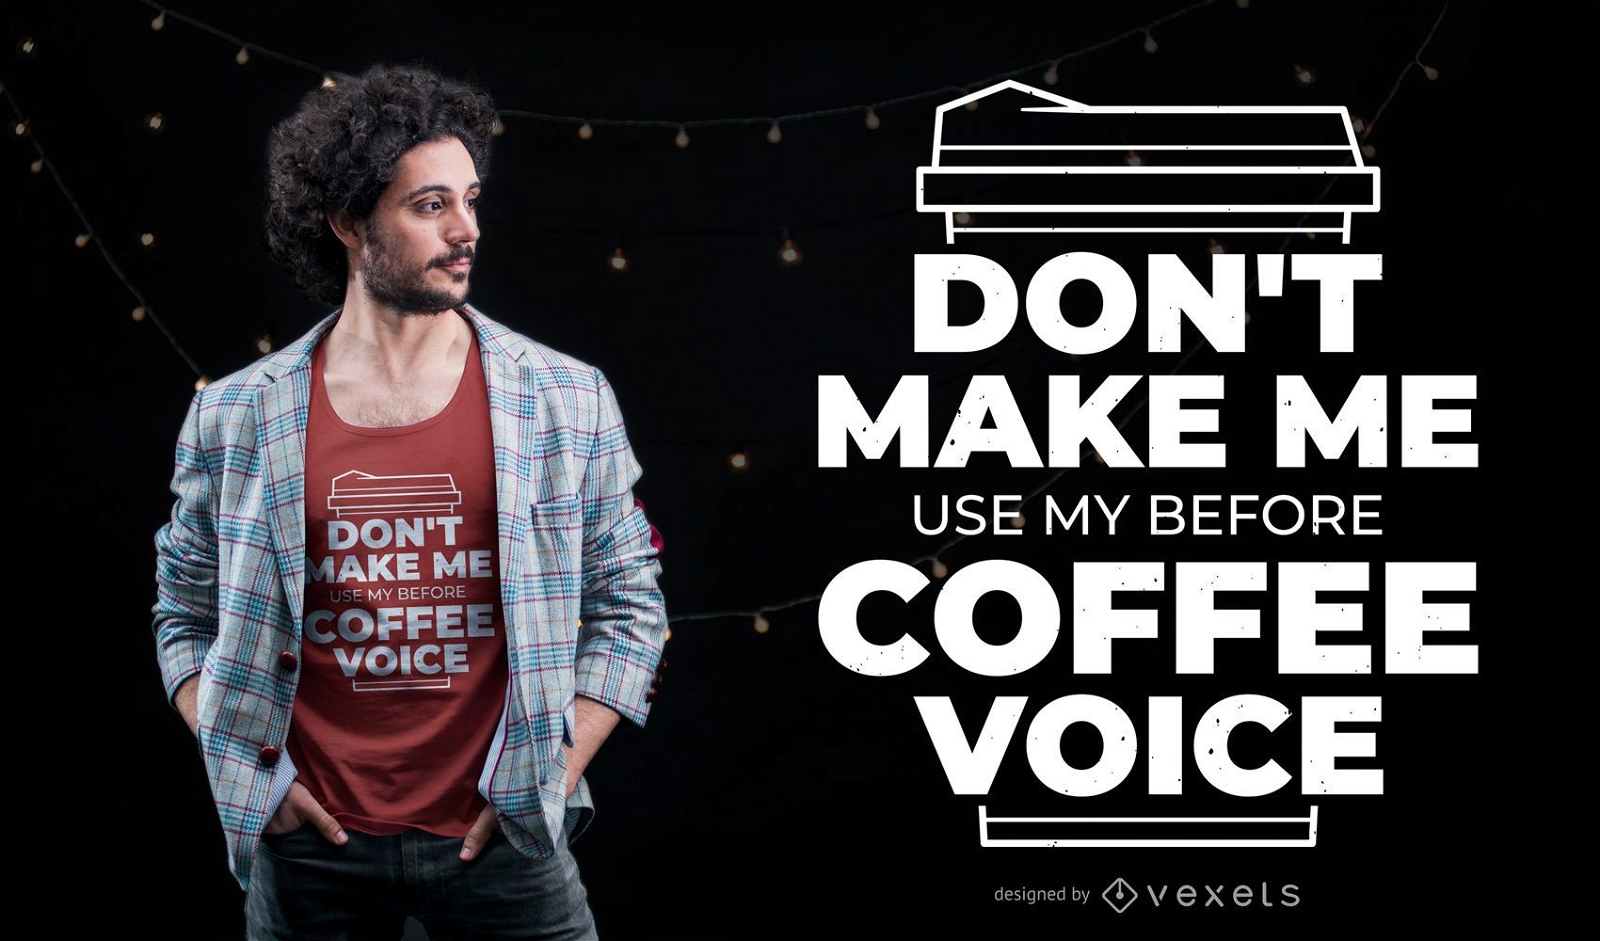 Before coffee voice t-shirt design